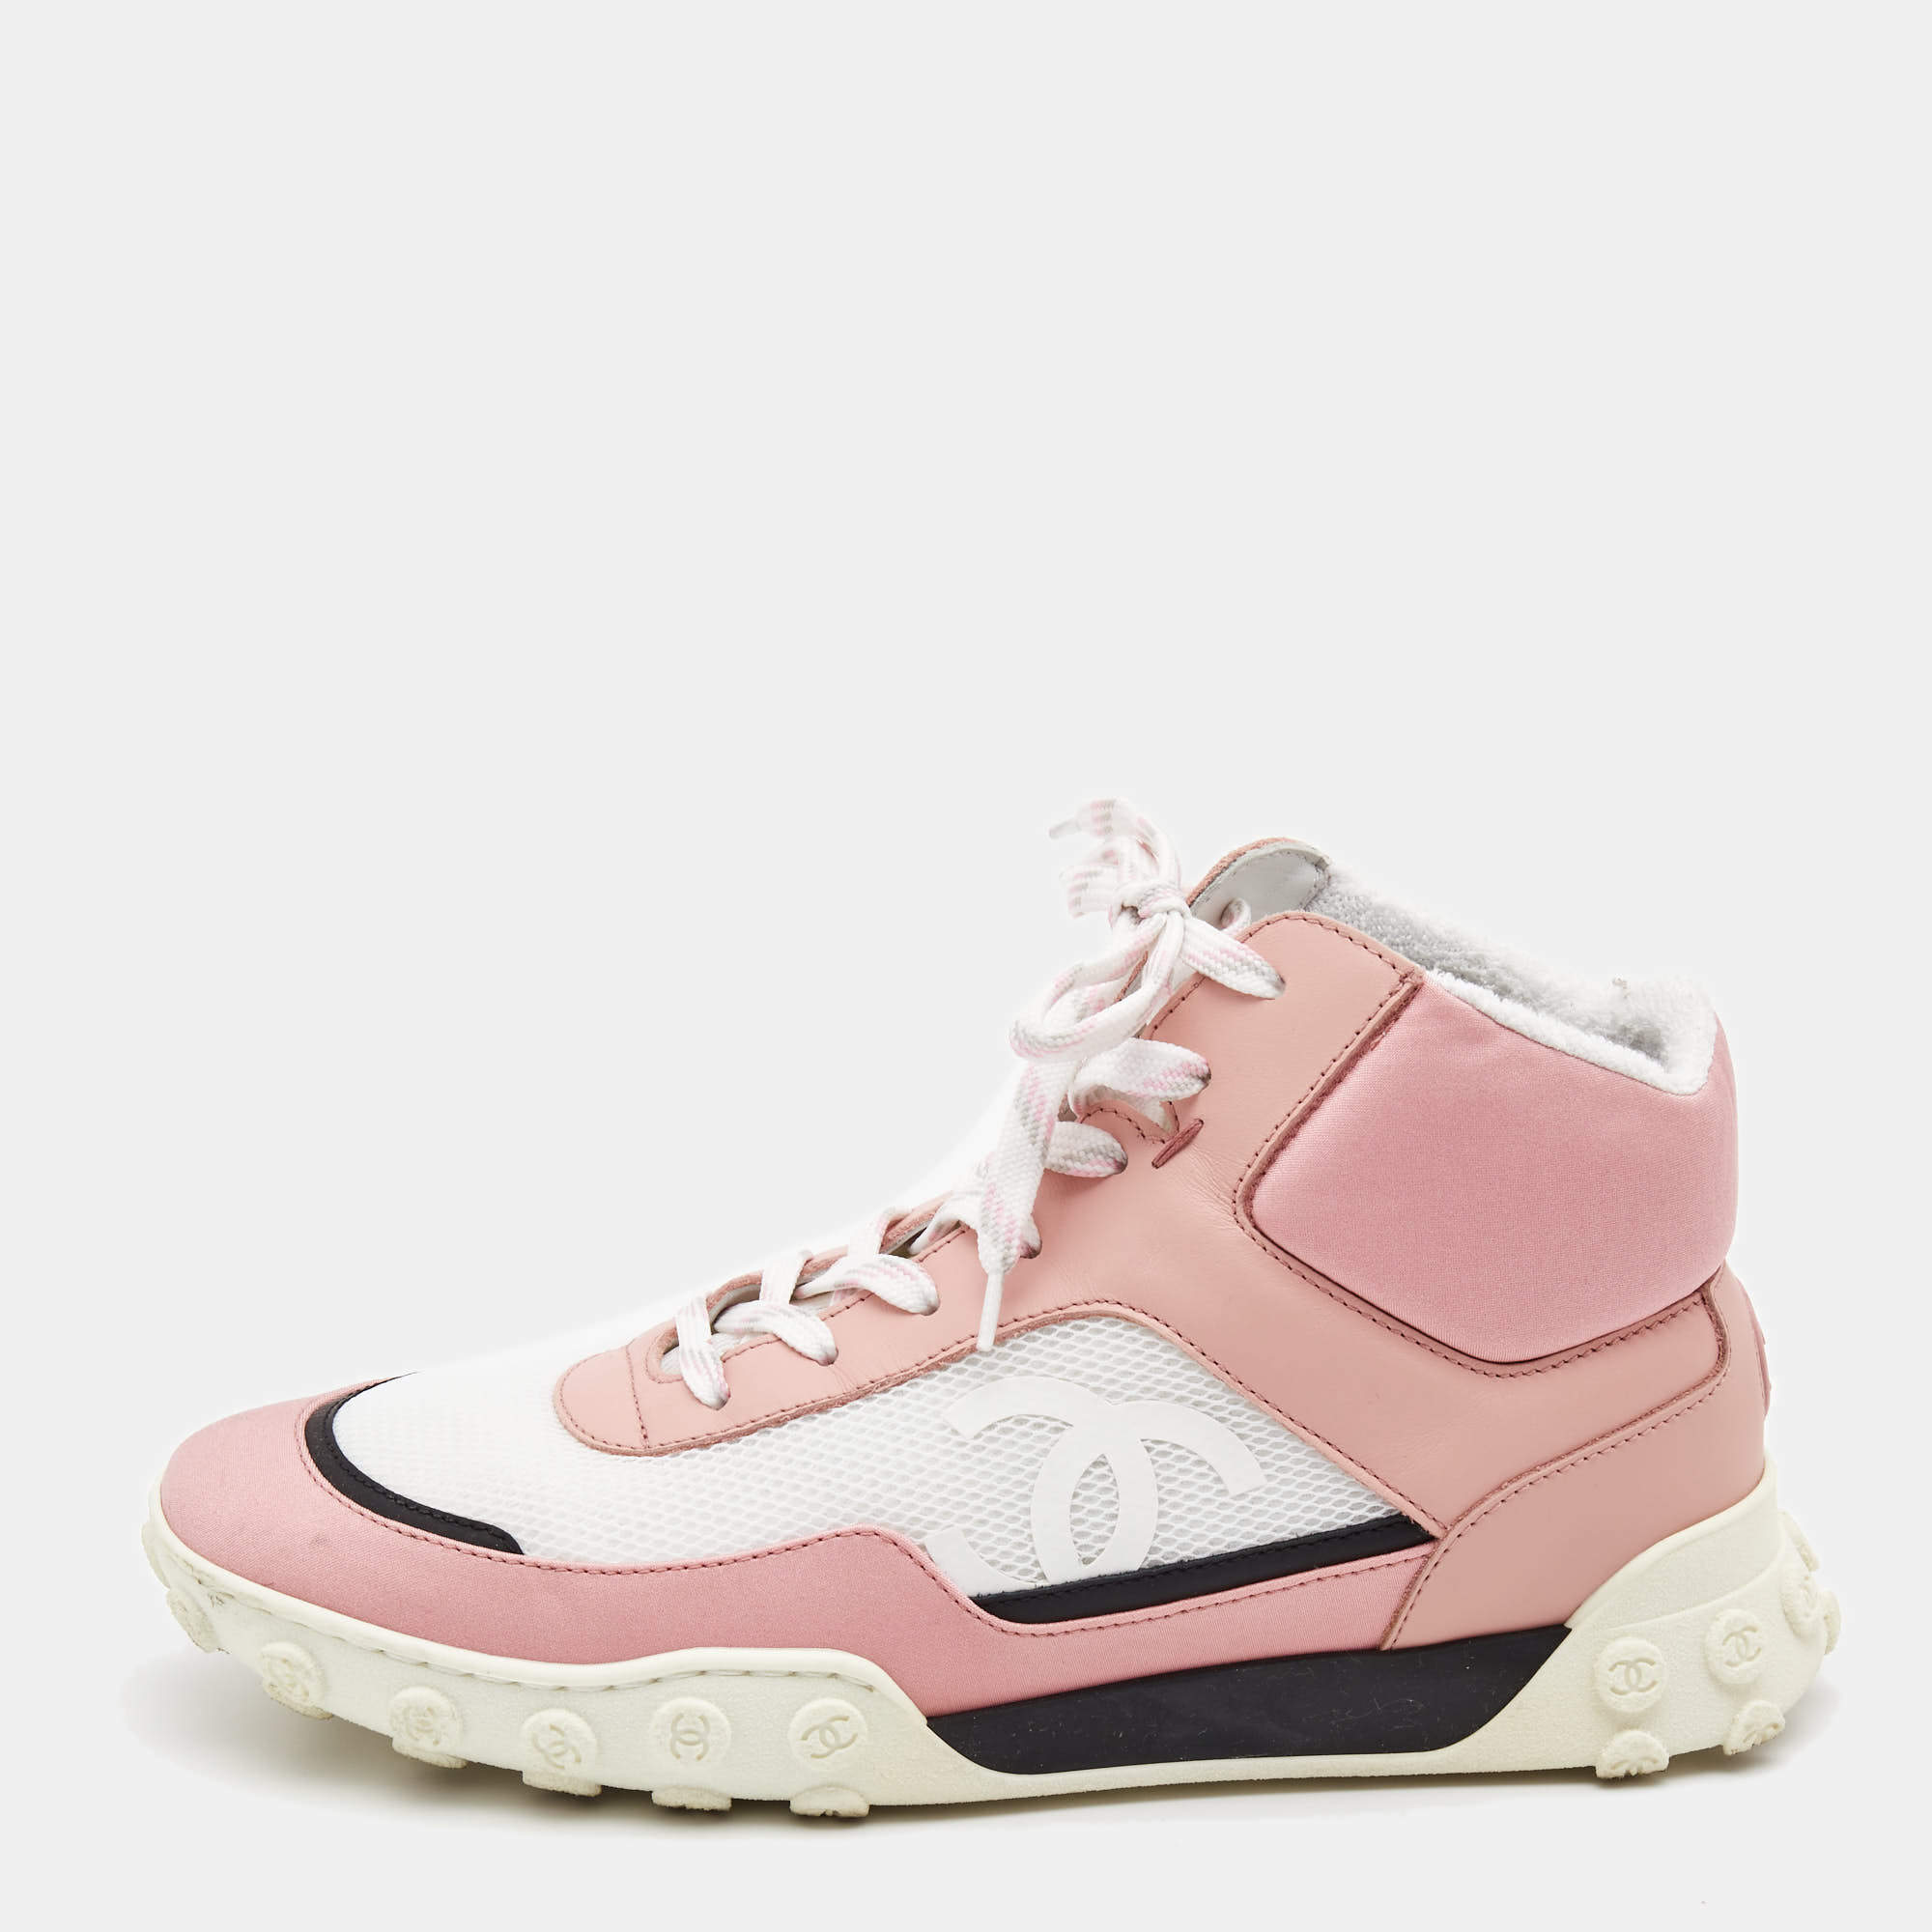 Chanel Pink/White Fabric and Mesh CC High Top Sneakers Size 37.5